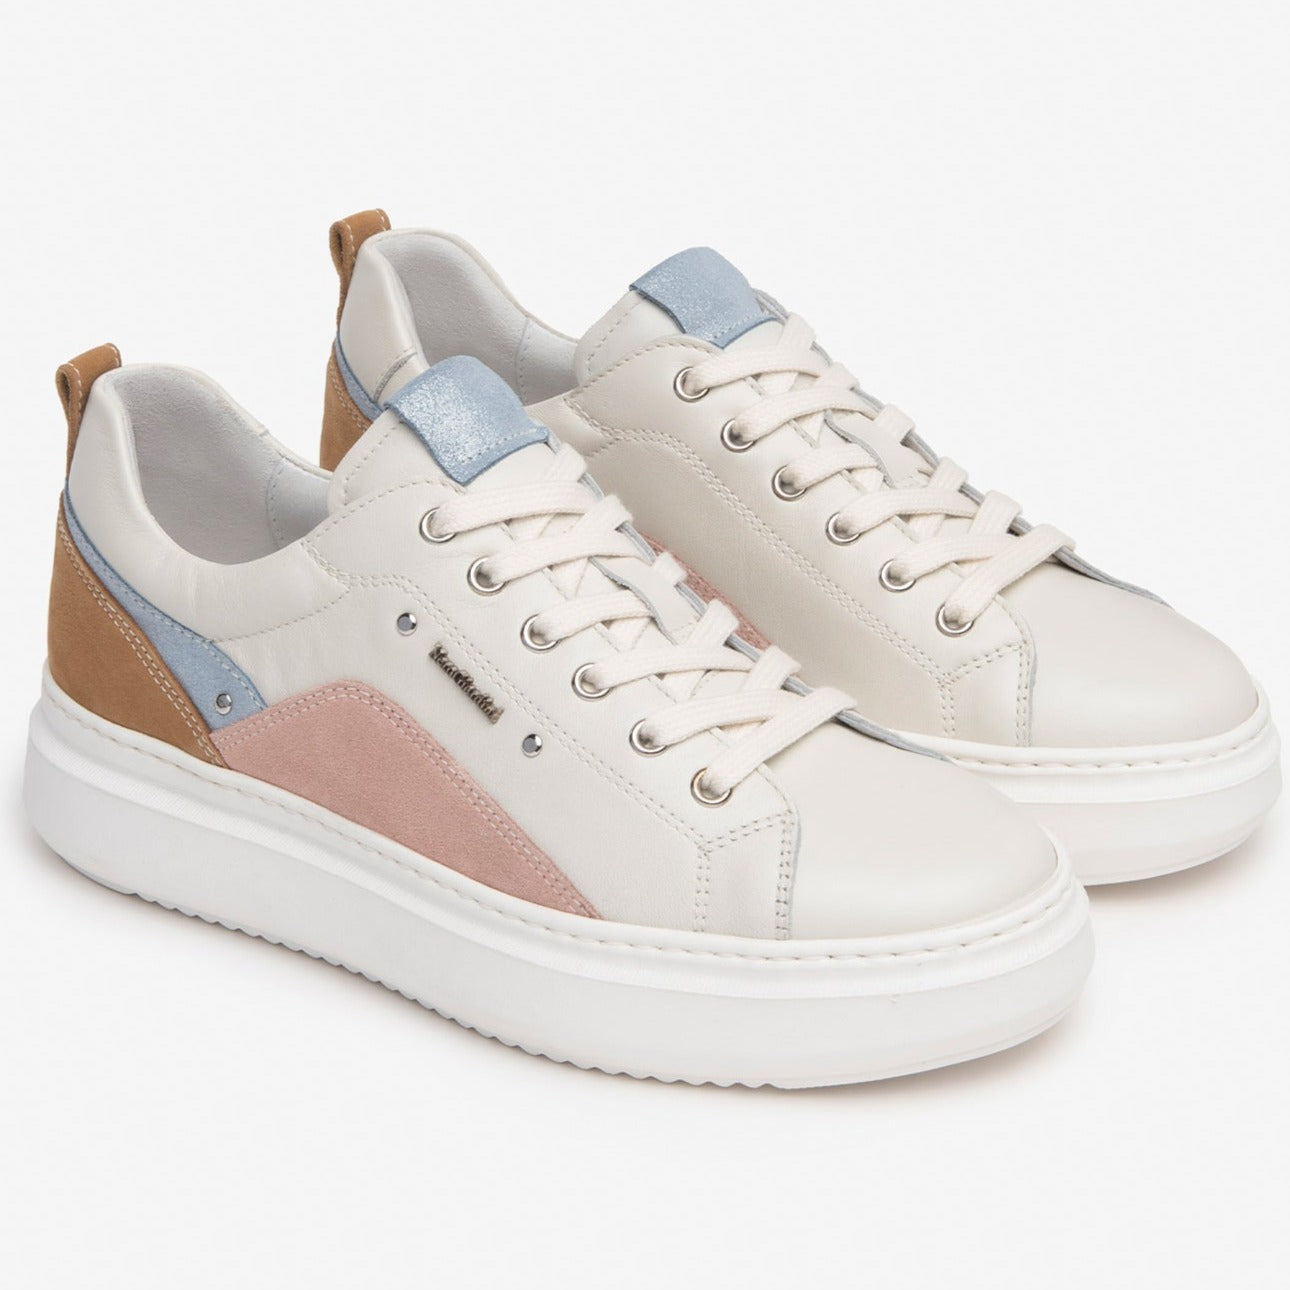 Sneakers NeroGiardini woman white leather suede inserts peony